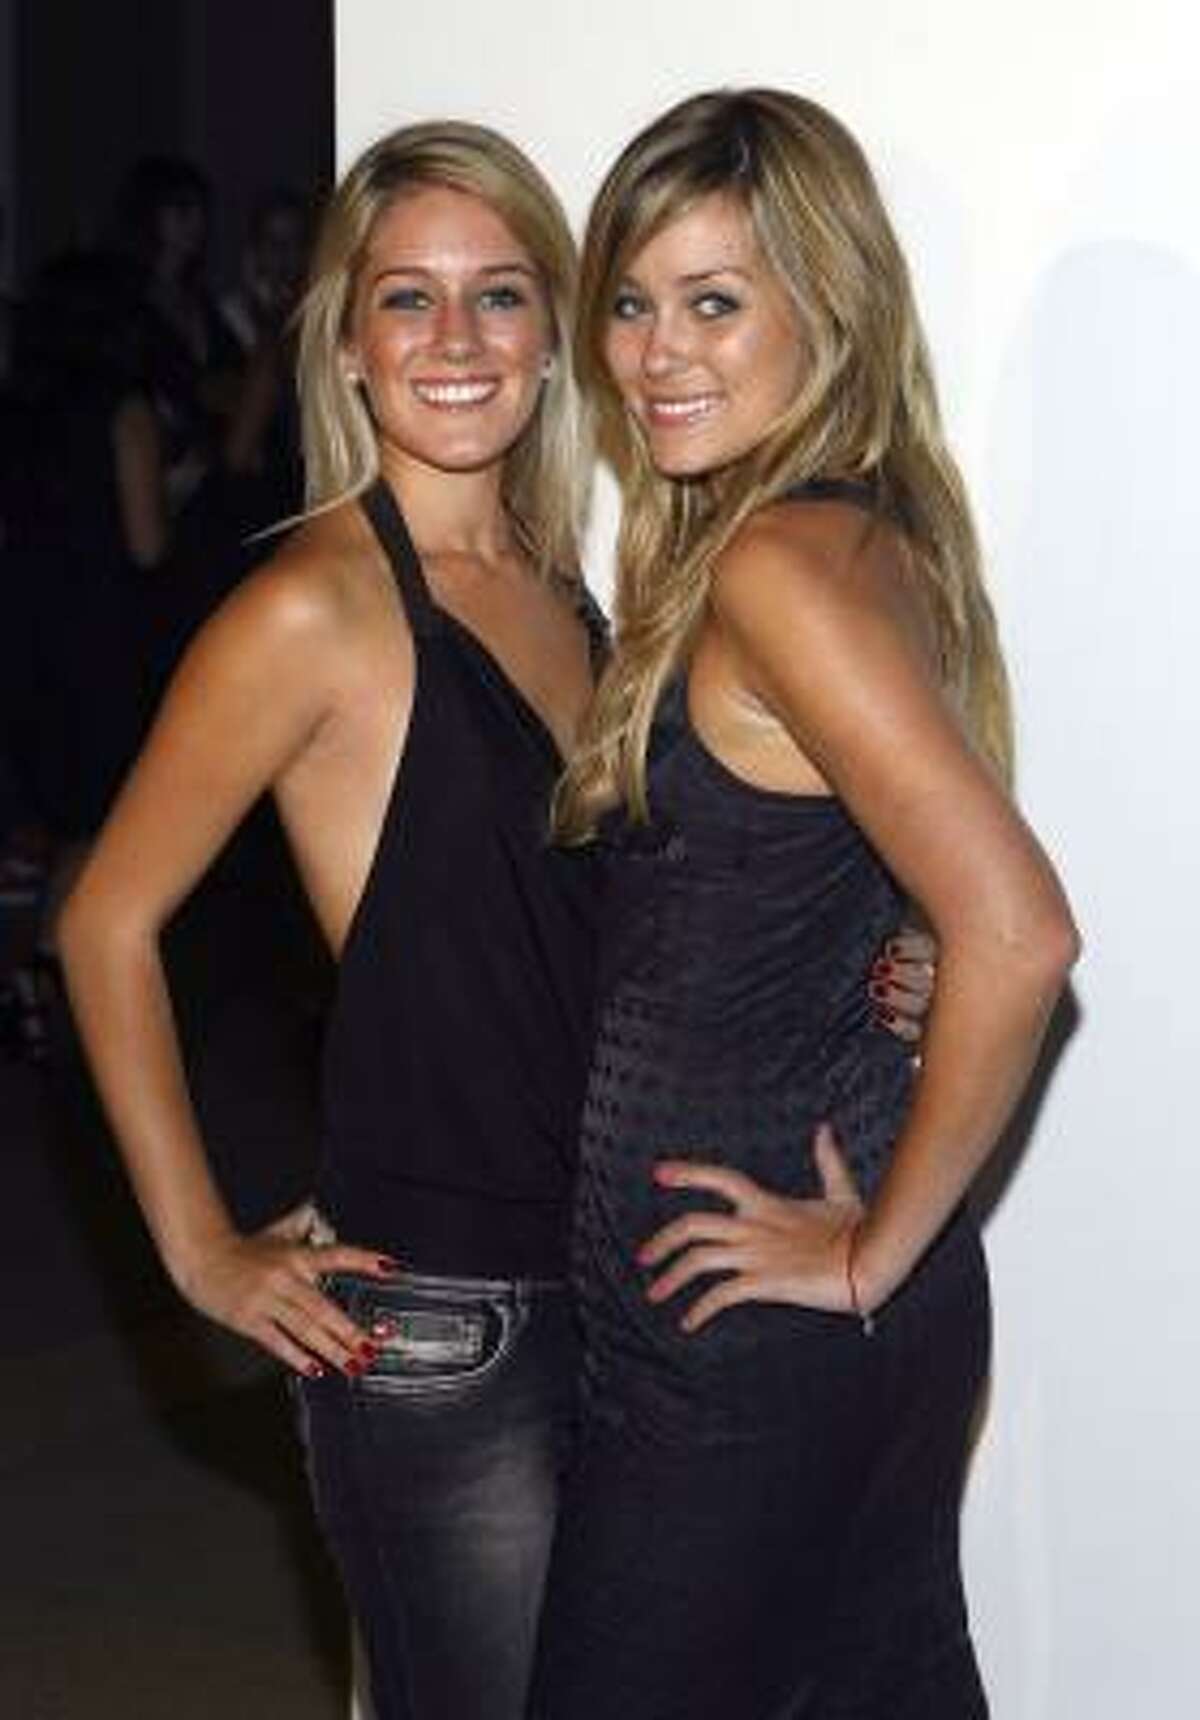 Montag, left, admitted in an interview with Us Weekly that she was always insecure about her body.